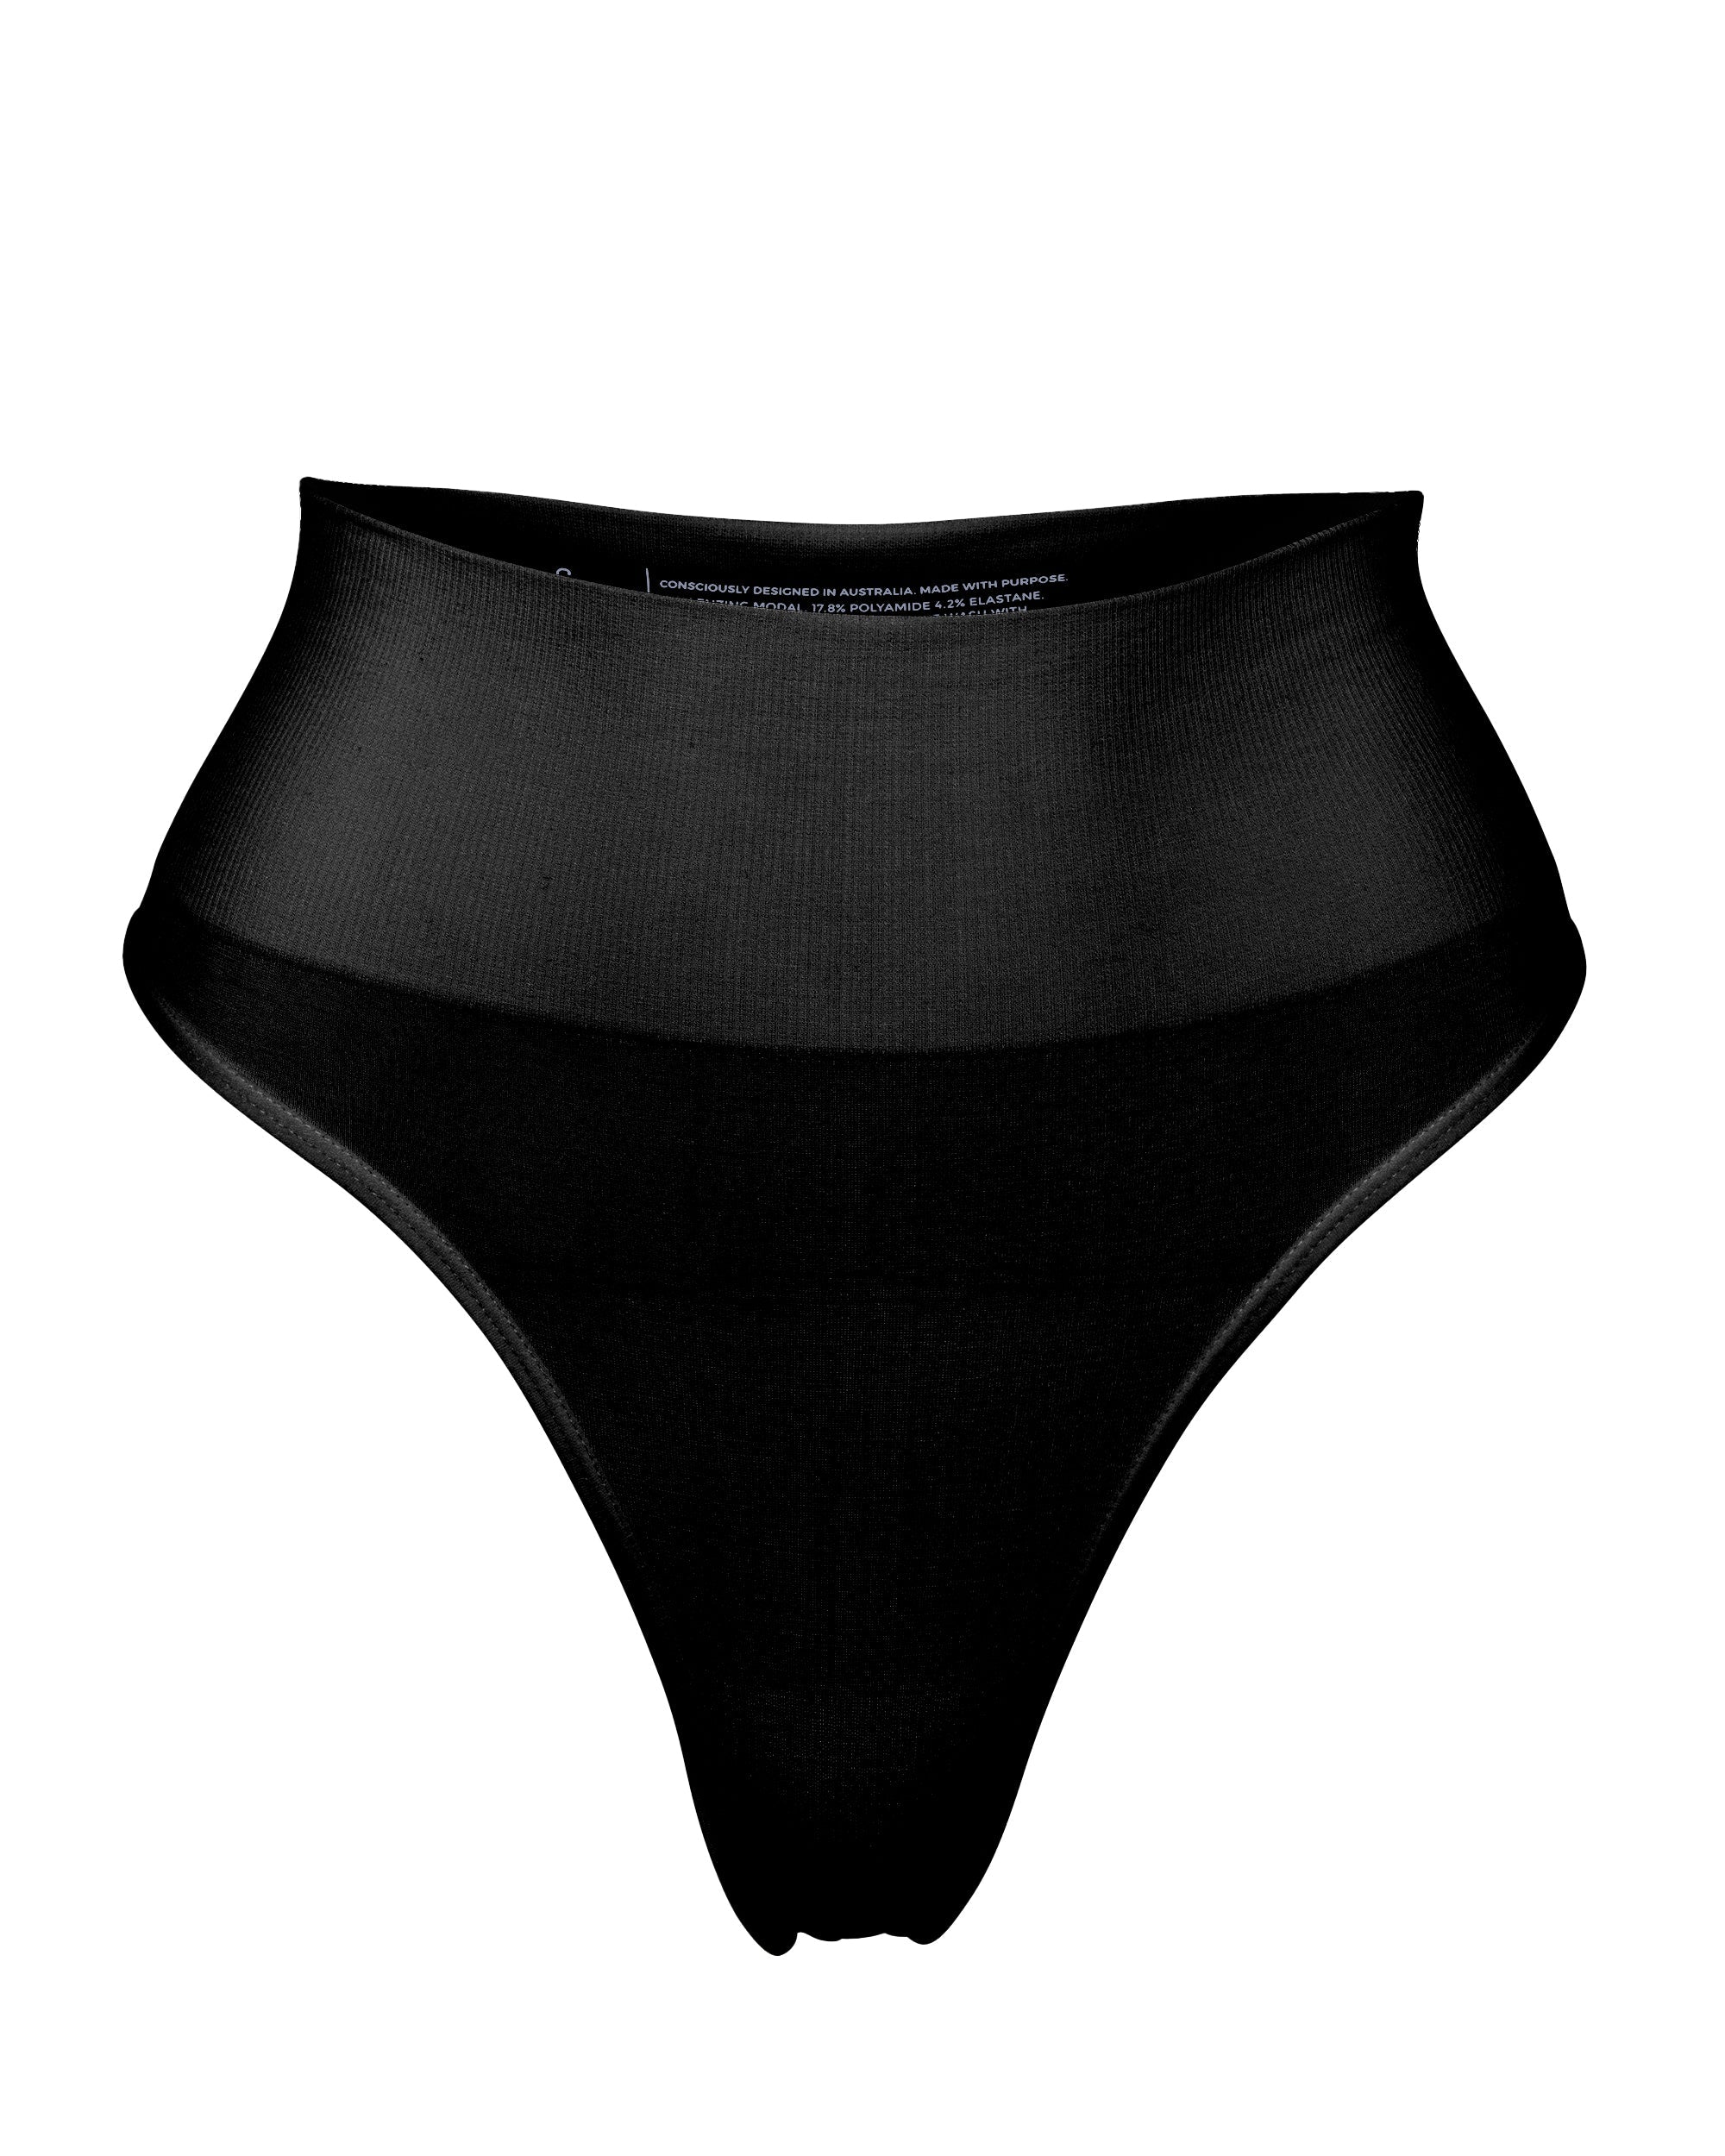 ChiChi G String Mixed 4 Set - Black/Marle Grey - Firm Compression Waistband